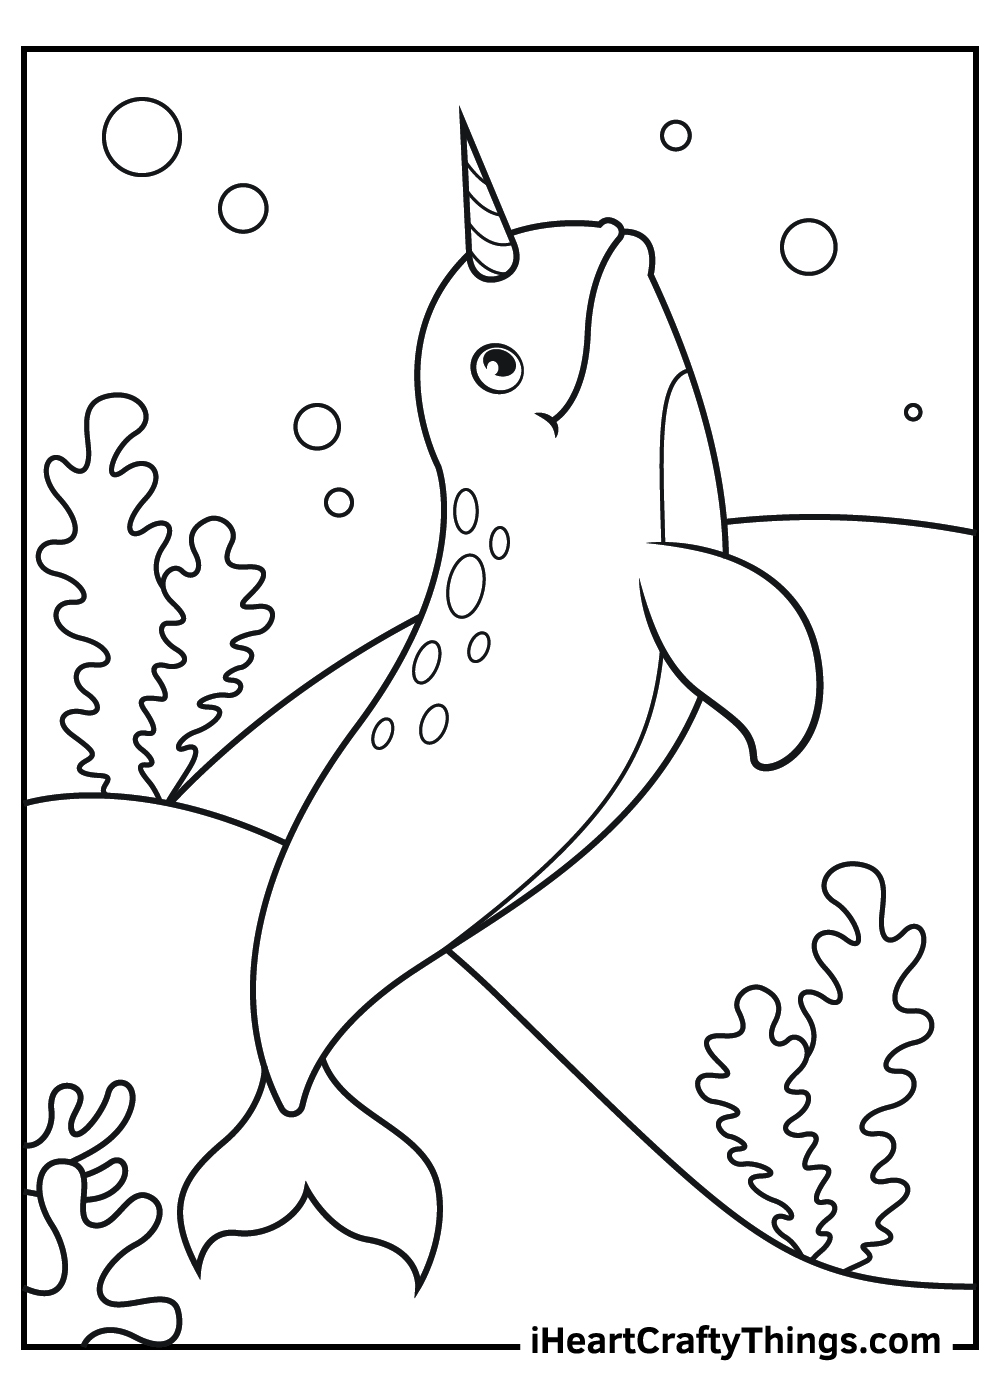 Narwhal Coloring Pages Updated 20